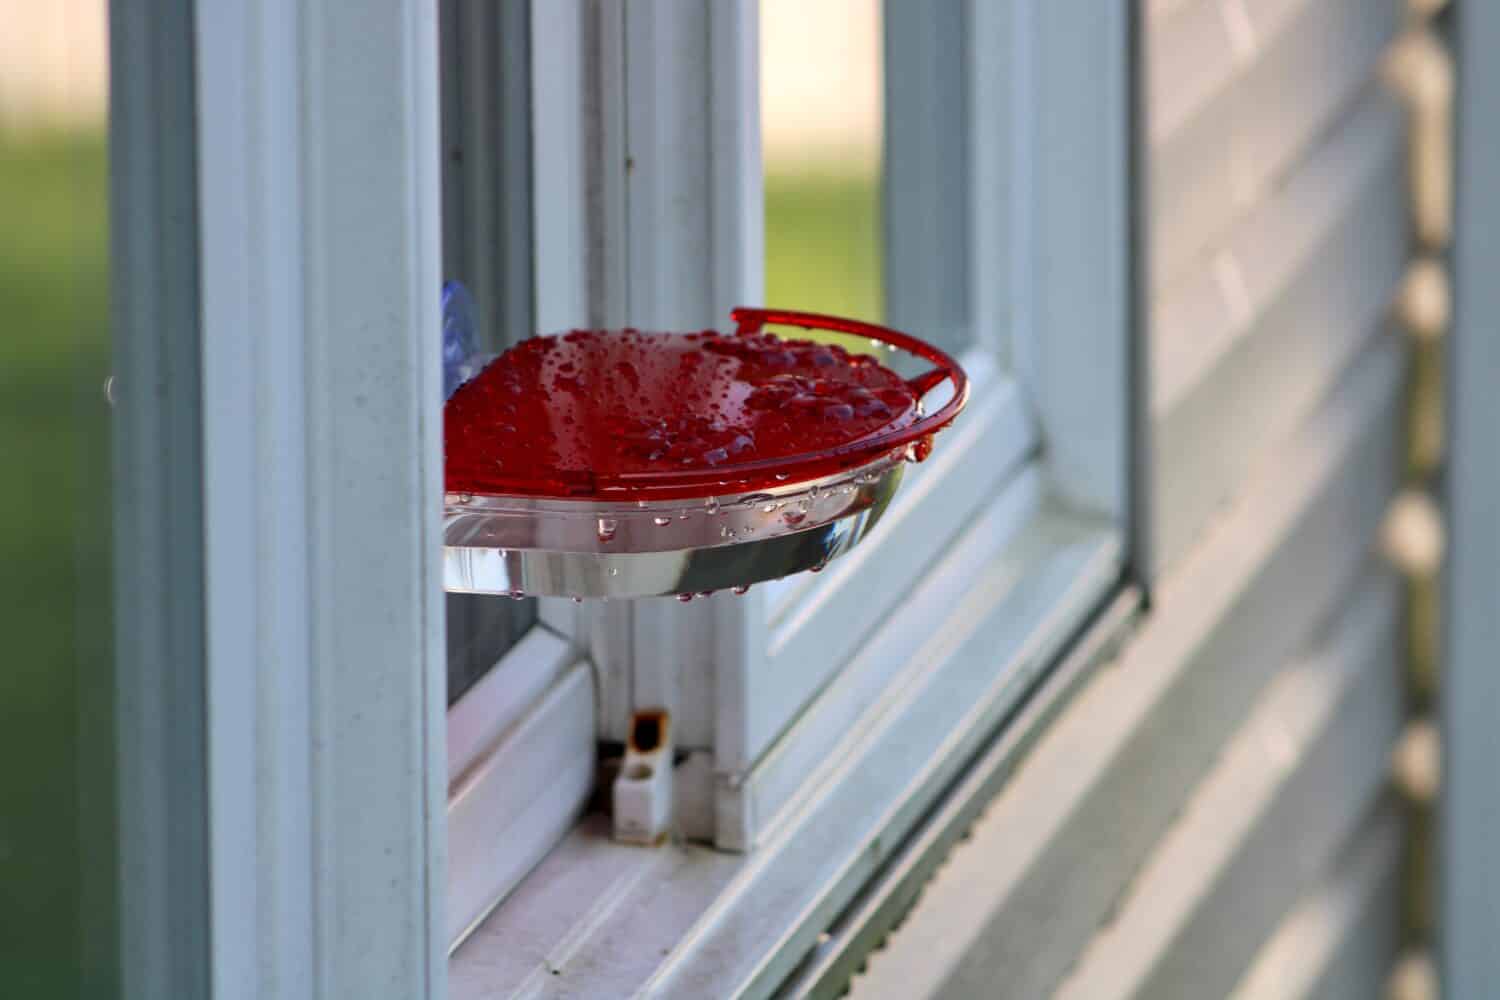 A round window feeder that is attached by suction cups outside. The humming bird feeder is red with three feeding ports and a bar for the birds to perch on while drinking.